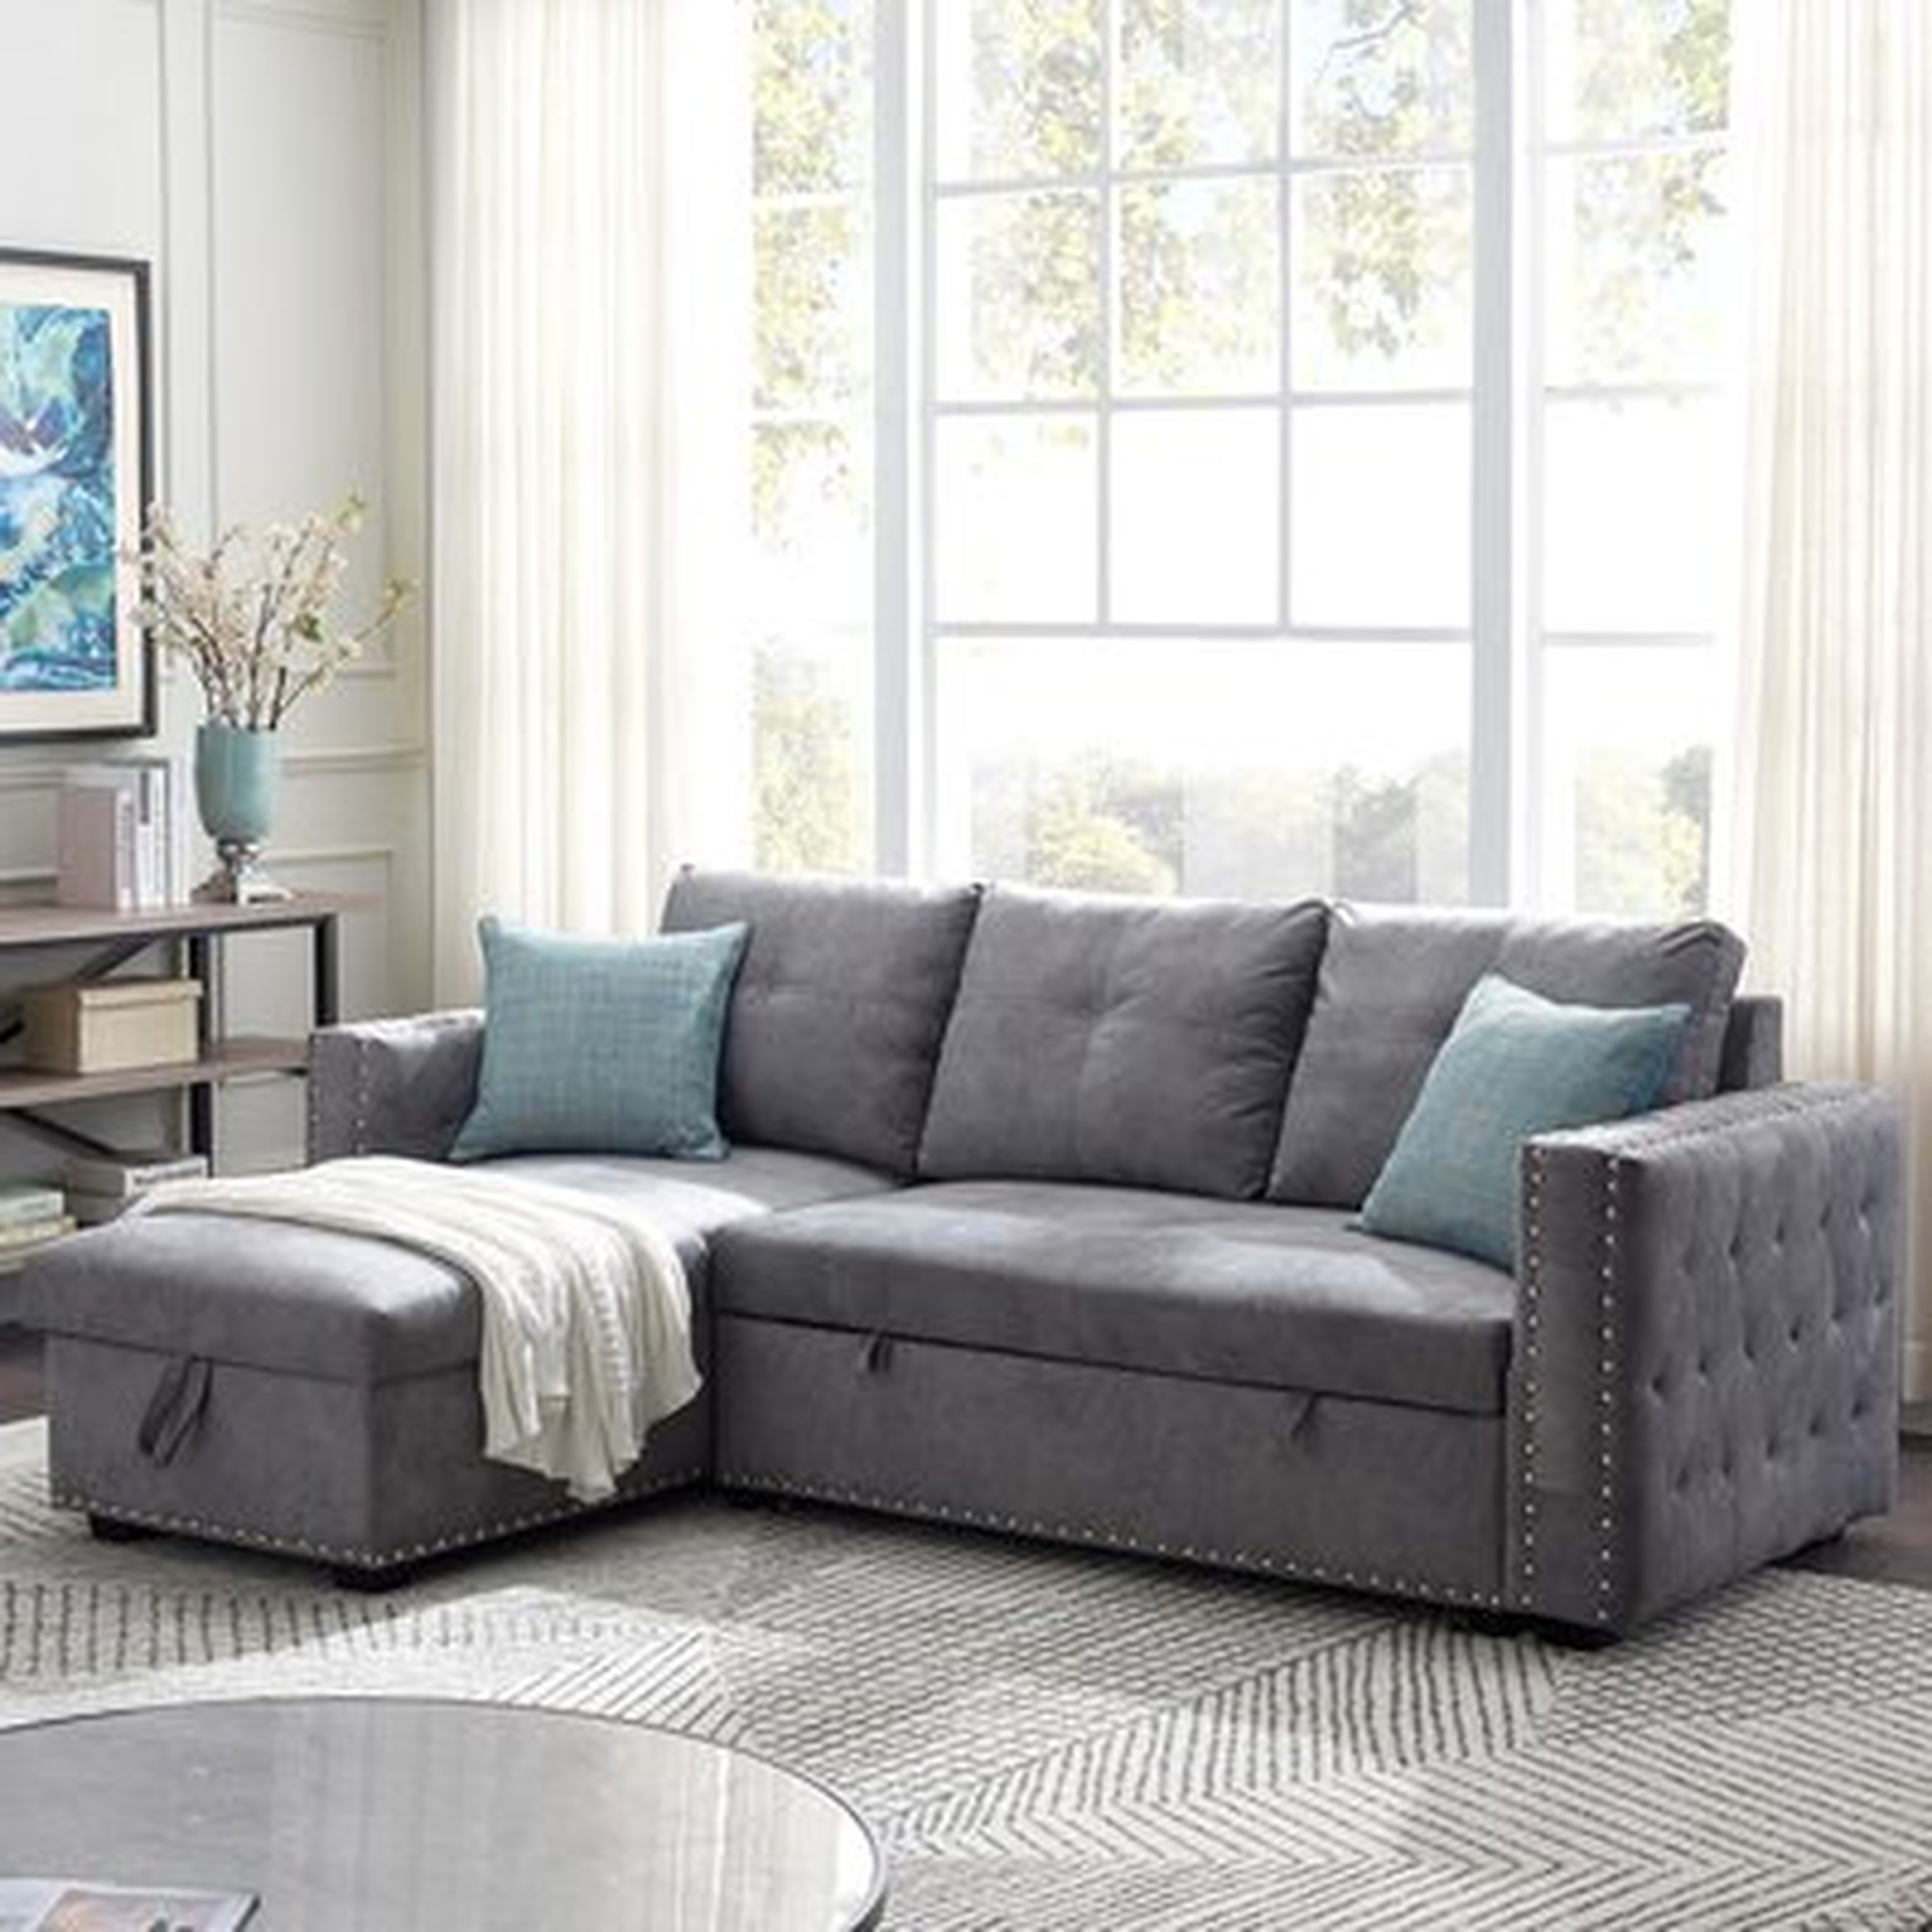 91*64.5*35.5" Reversible Sleeper Sectional Storage Sofa Bed,Corner Sofa-Bed With Storage,3 Seat Both Left Handed And Right Handed,Nailheaded - Wayfair